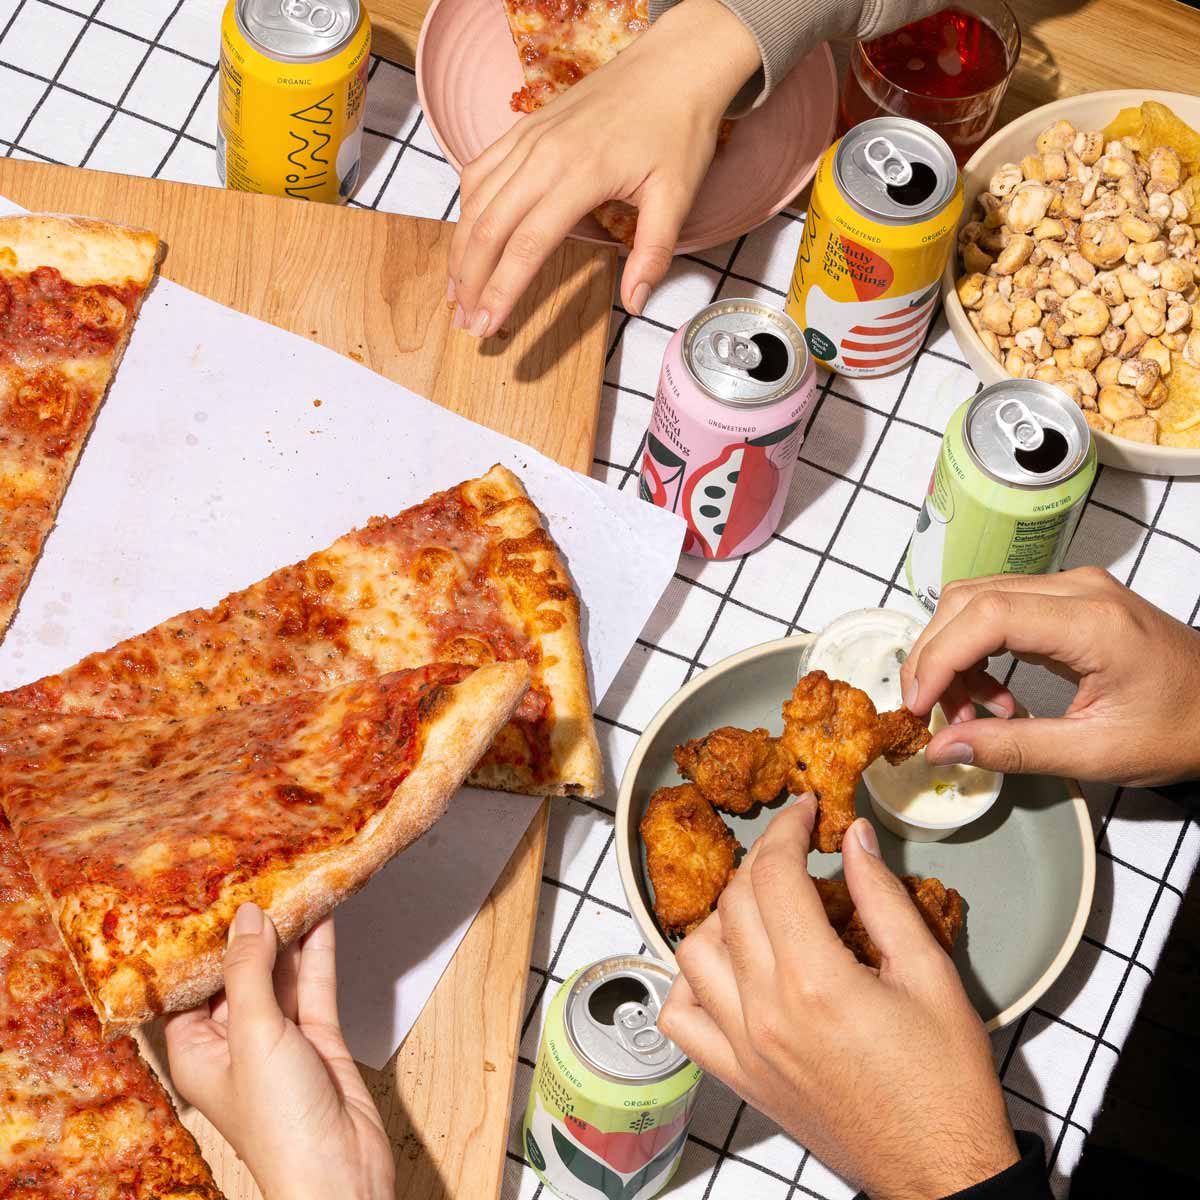 Hands reaching for pizza and wings